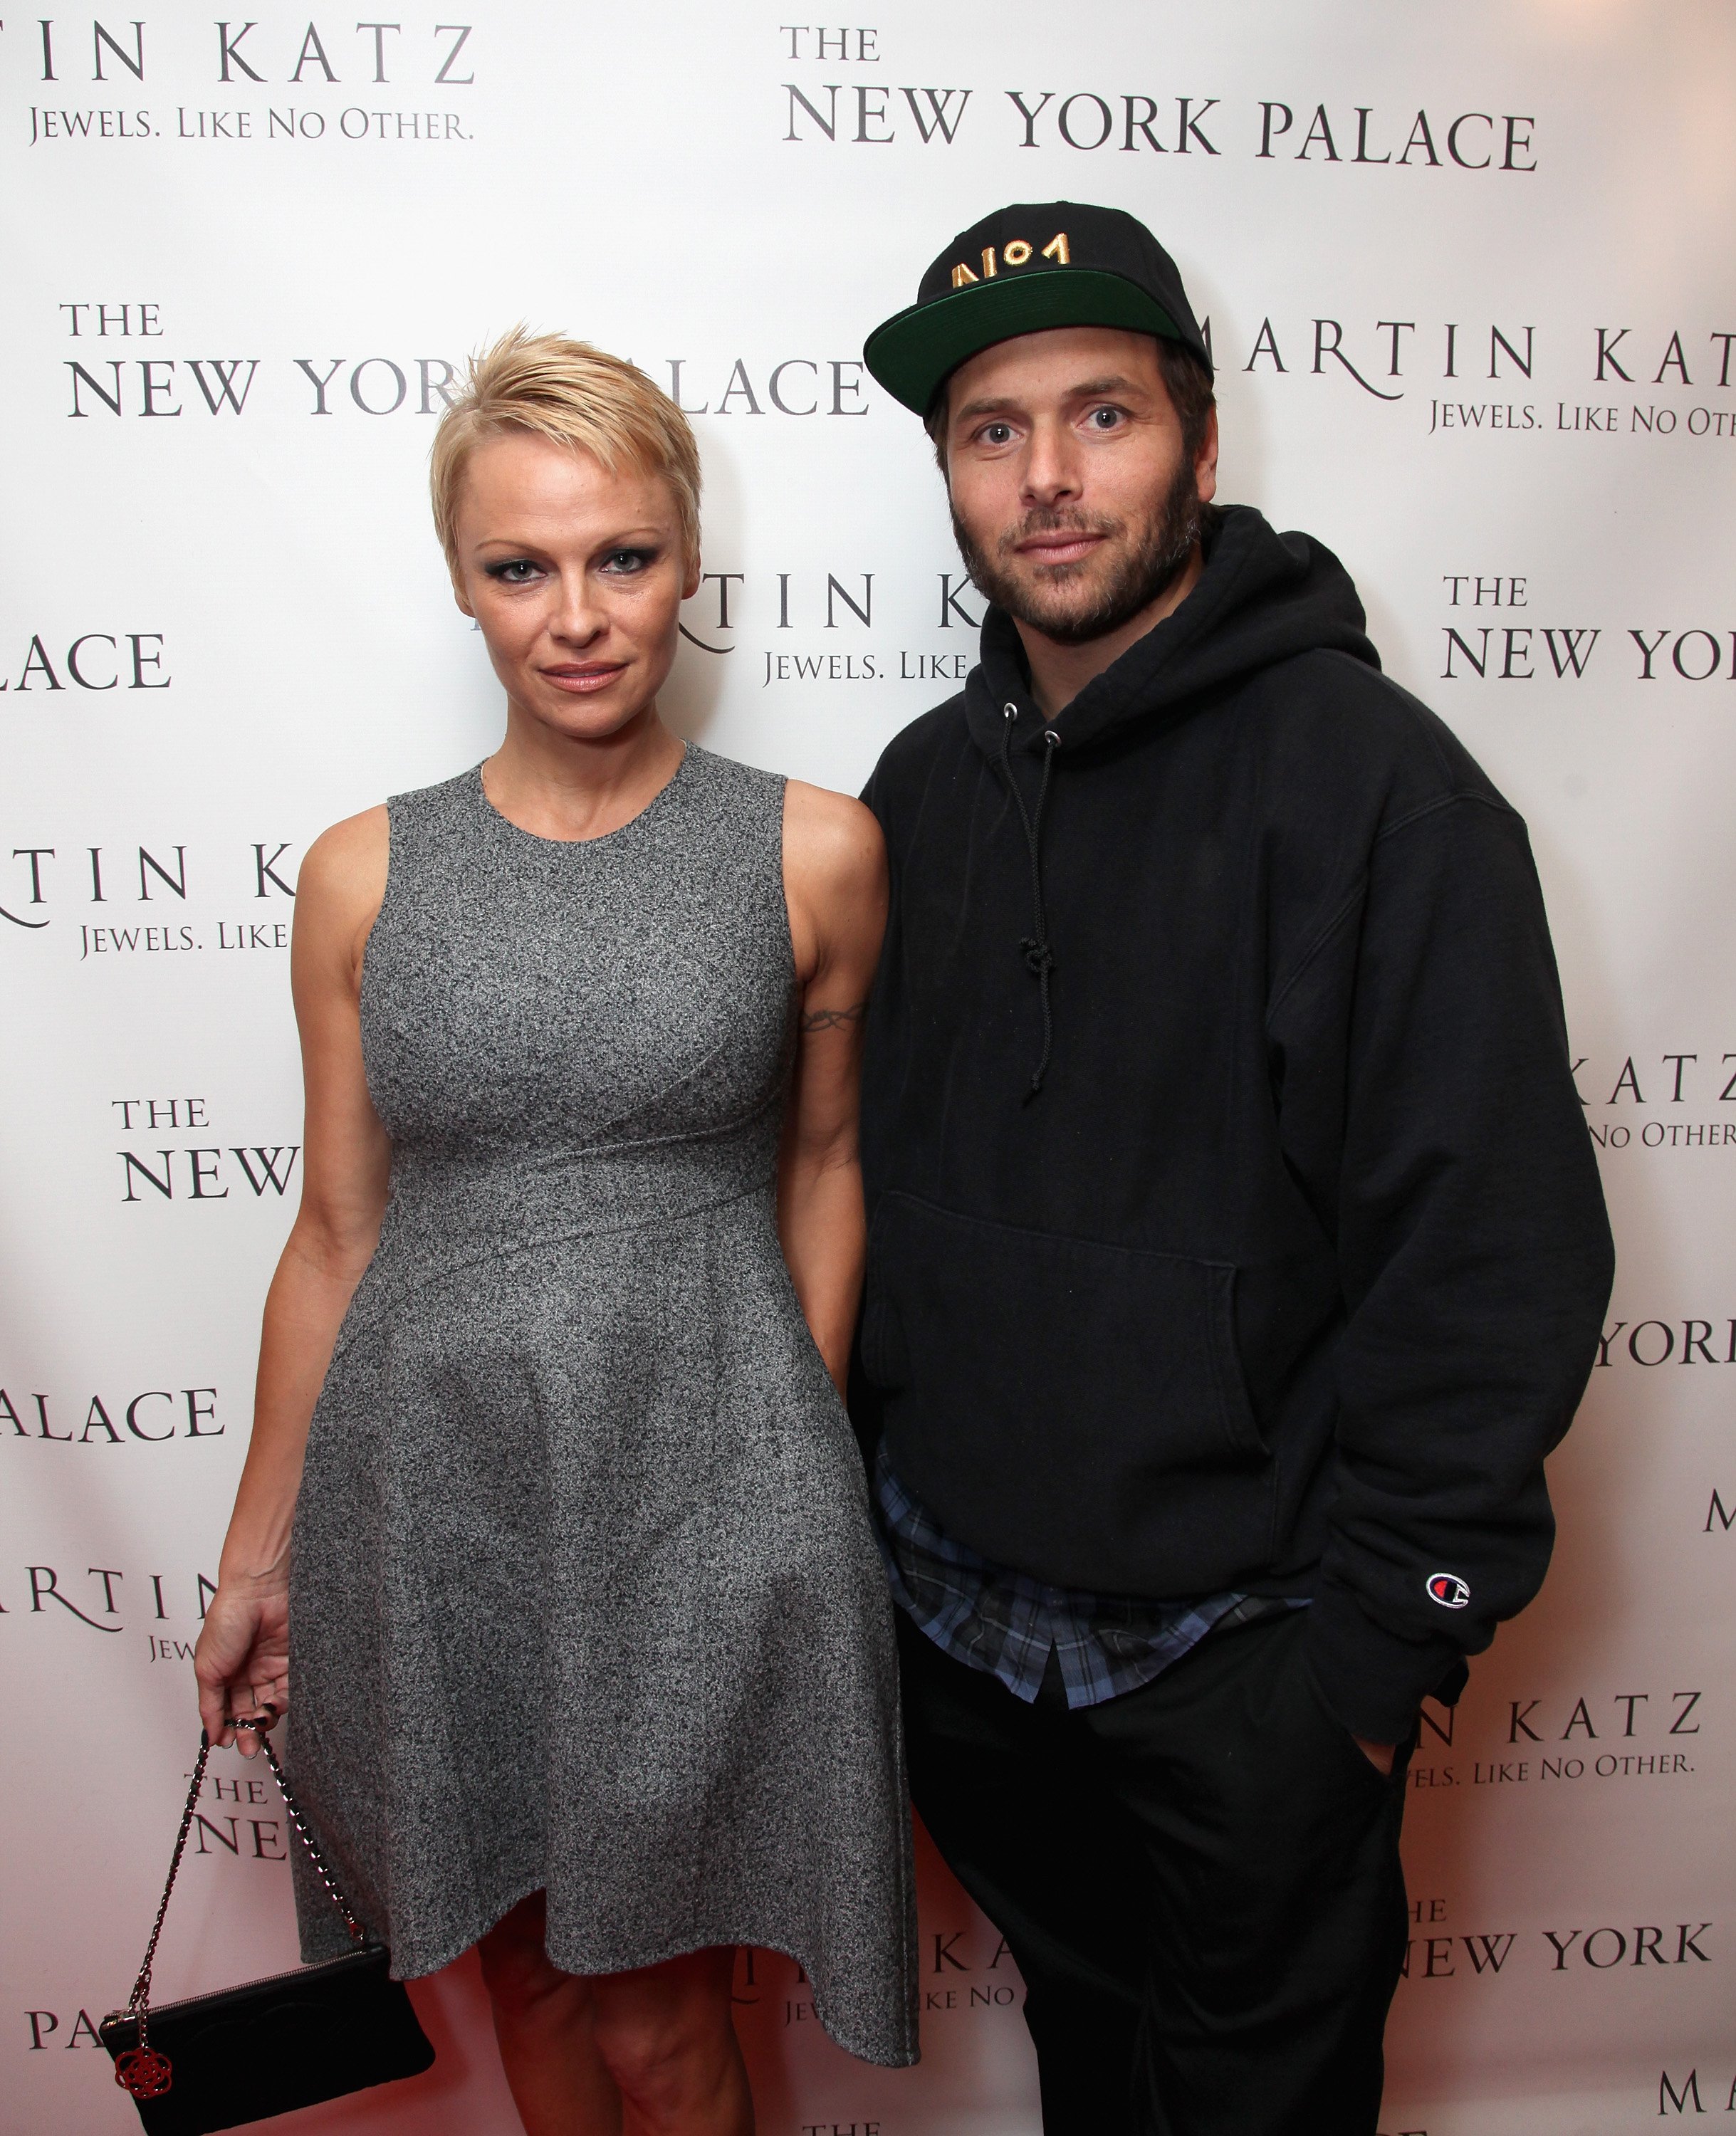 Pamela Anderson and Rick Salomon attend The Martin Katz Jewel Suite Debuts on November 13, 2013. | Source: Getty Images